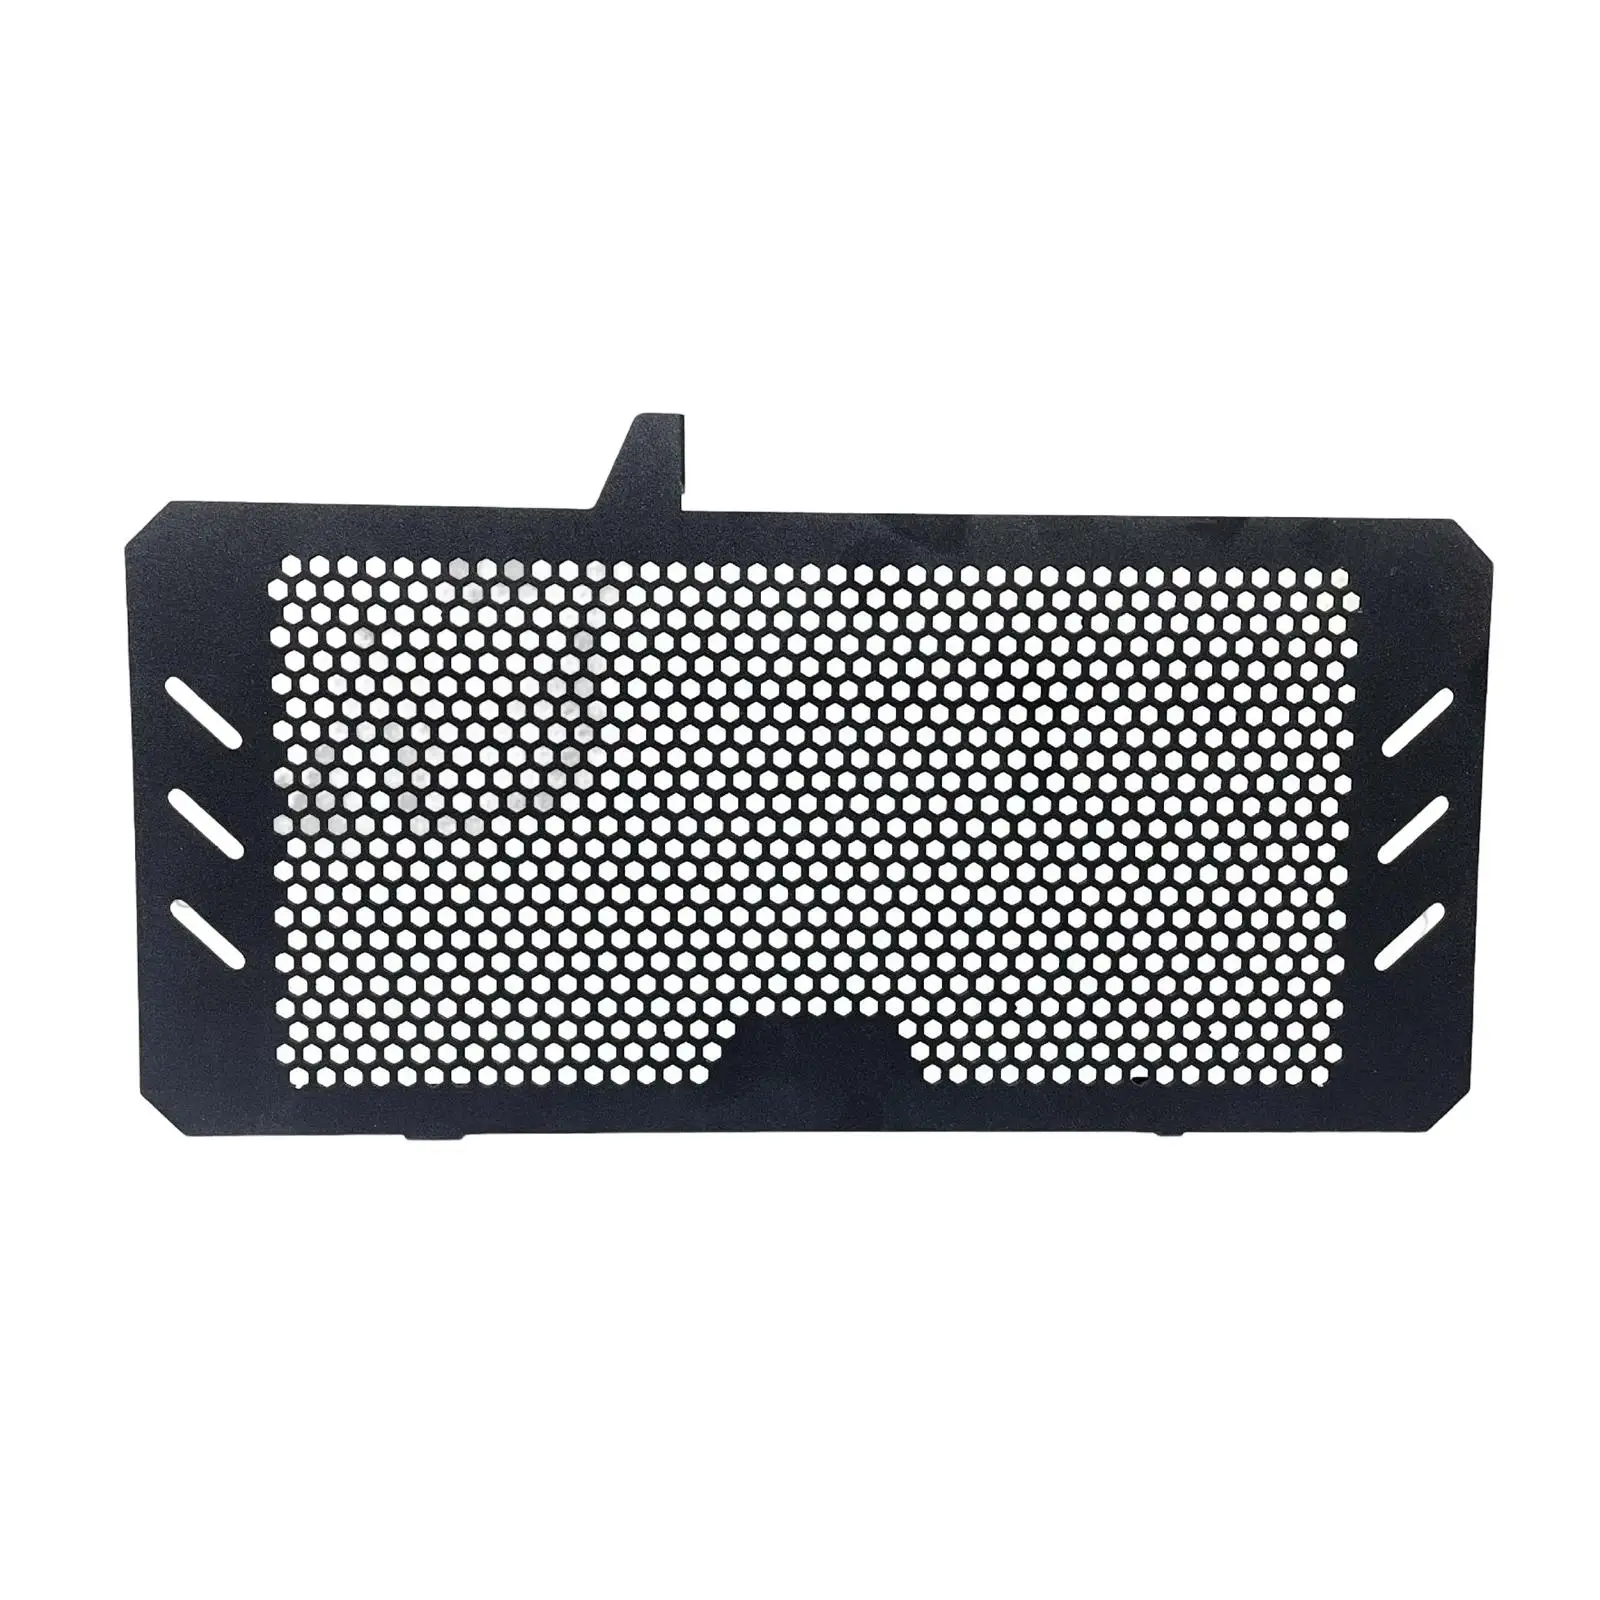 Motorcycle Radiator Grille Guard Protector for Honda NC750 Black Parts